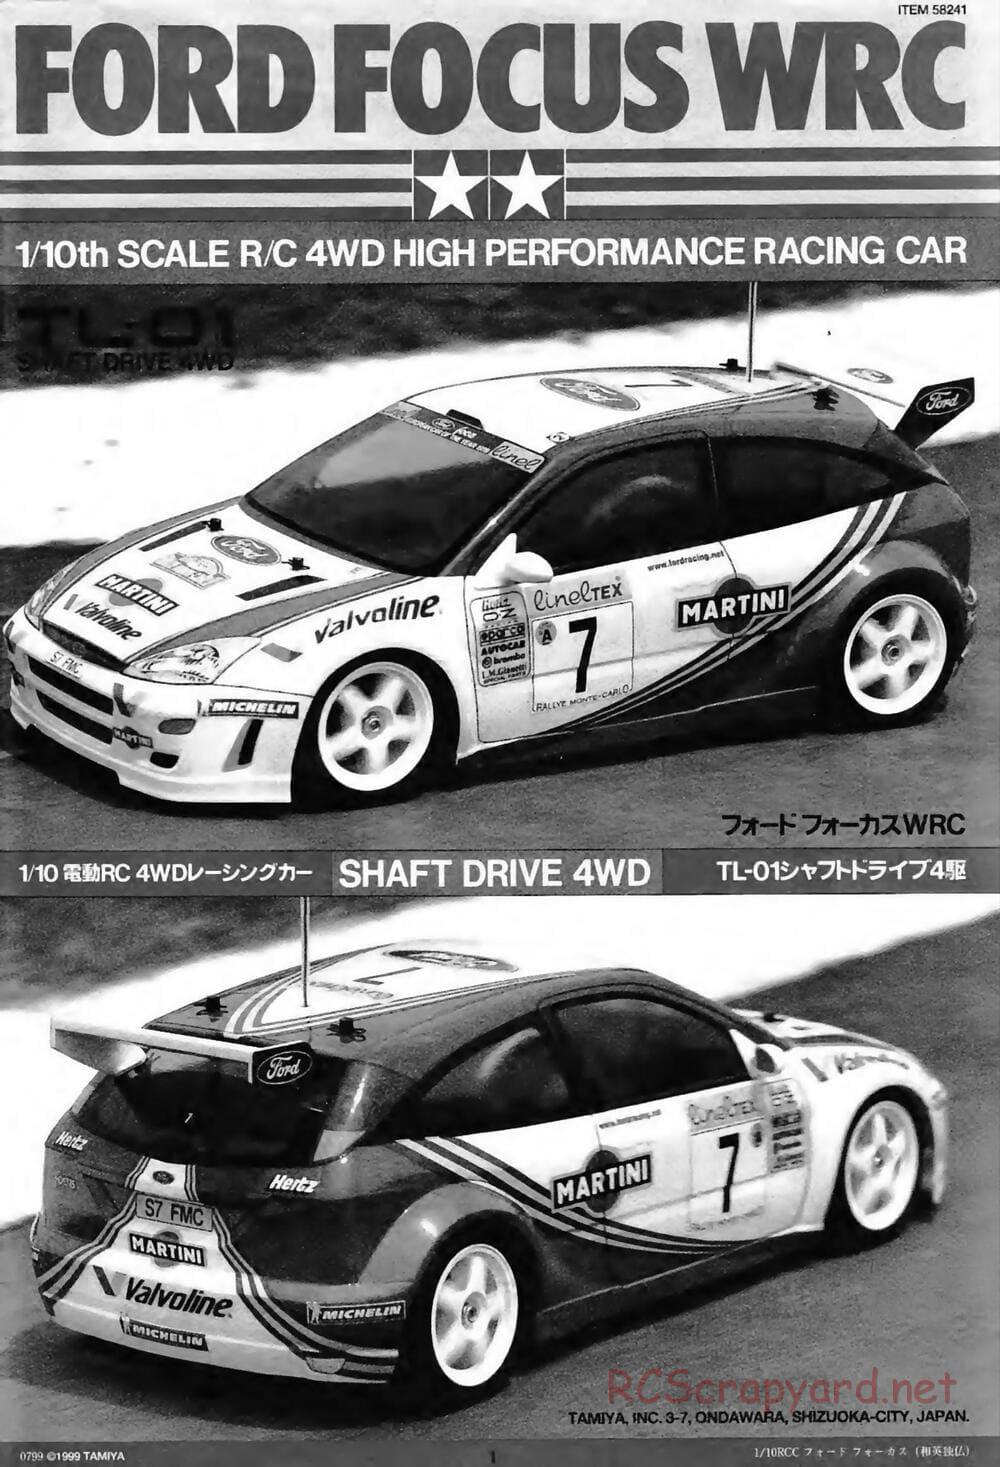 Tamiya - Ford Focus WRC - TL-01 Chassis - Manual - Page 1